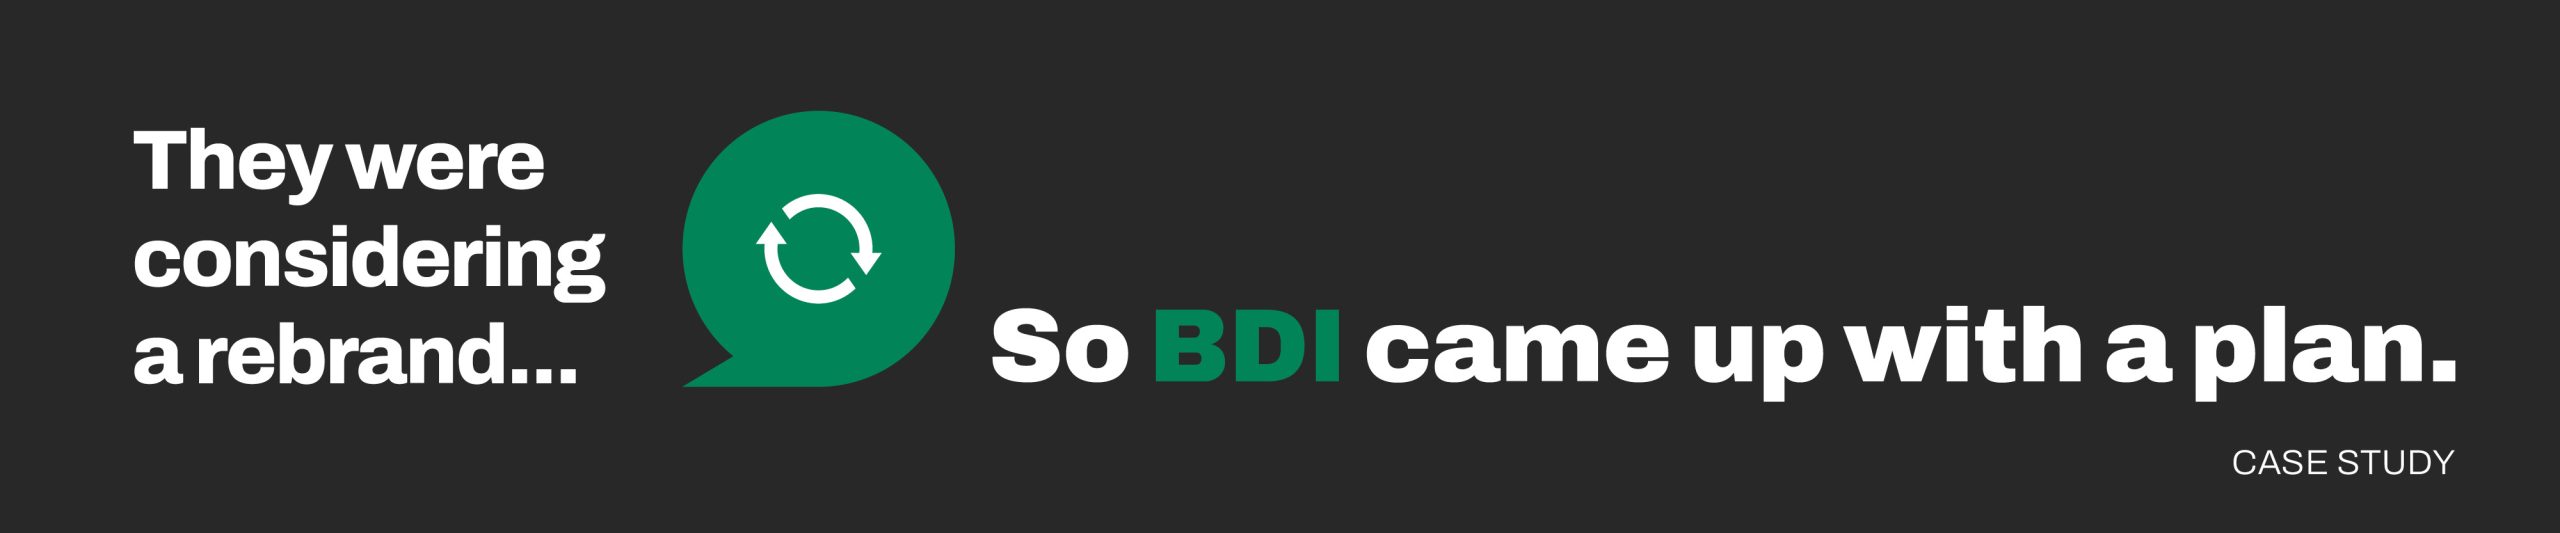 They were considering a rebrand so BDI came up with a plan